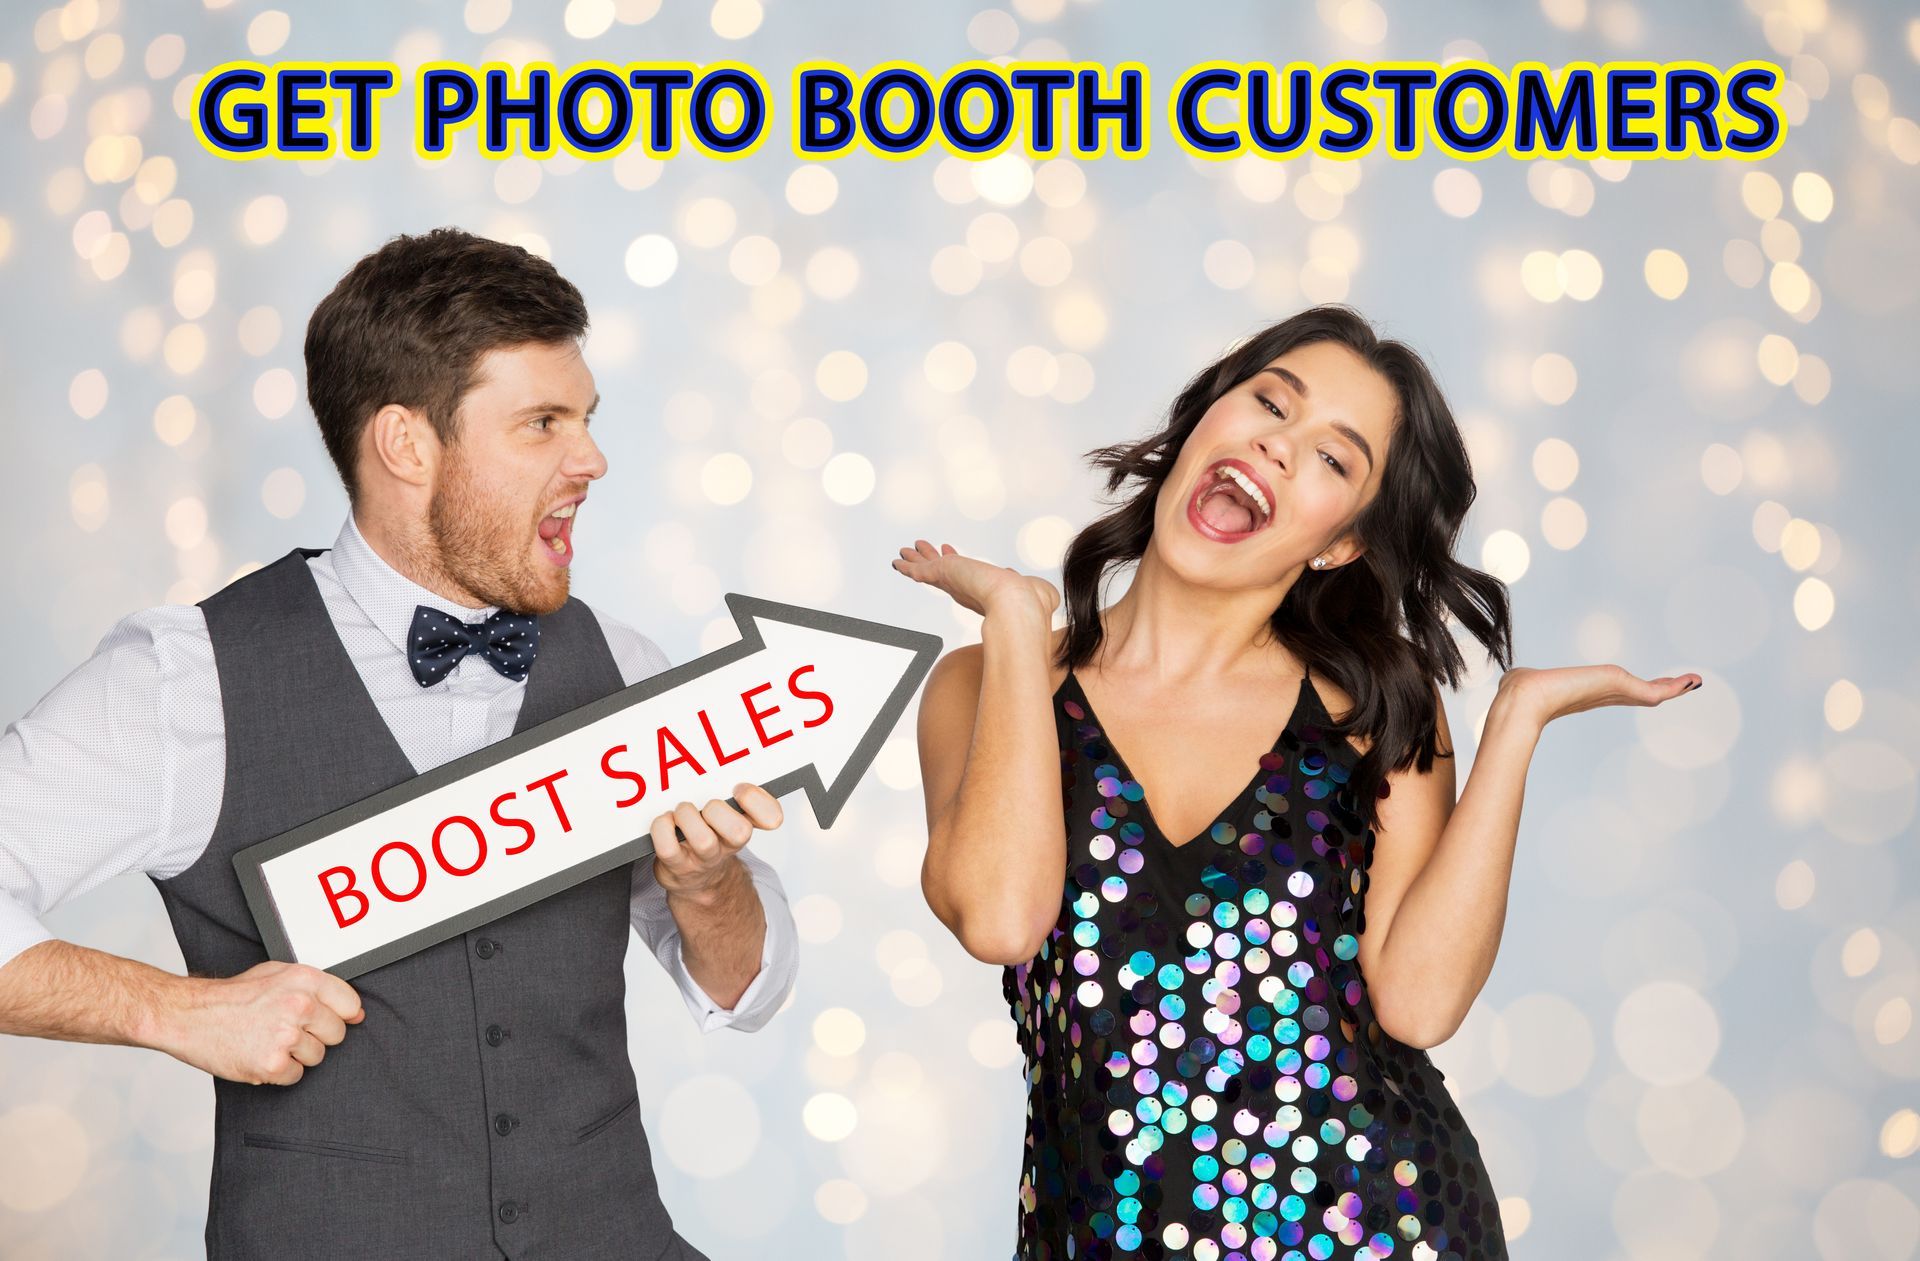 How to Promote Your Photo Booth Business